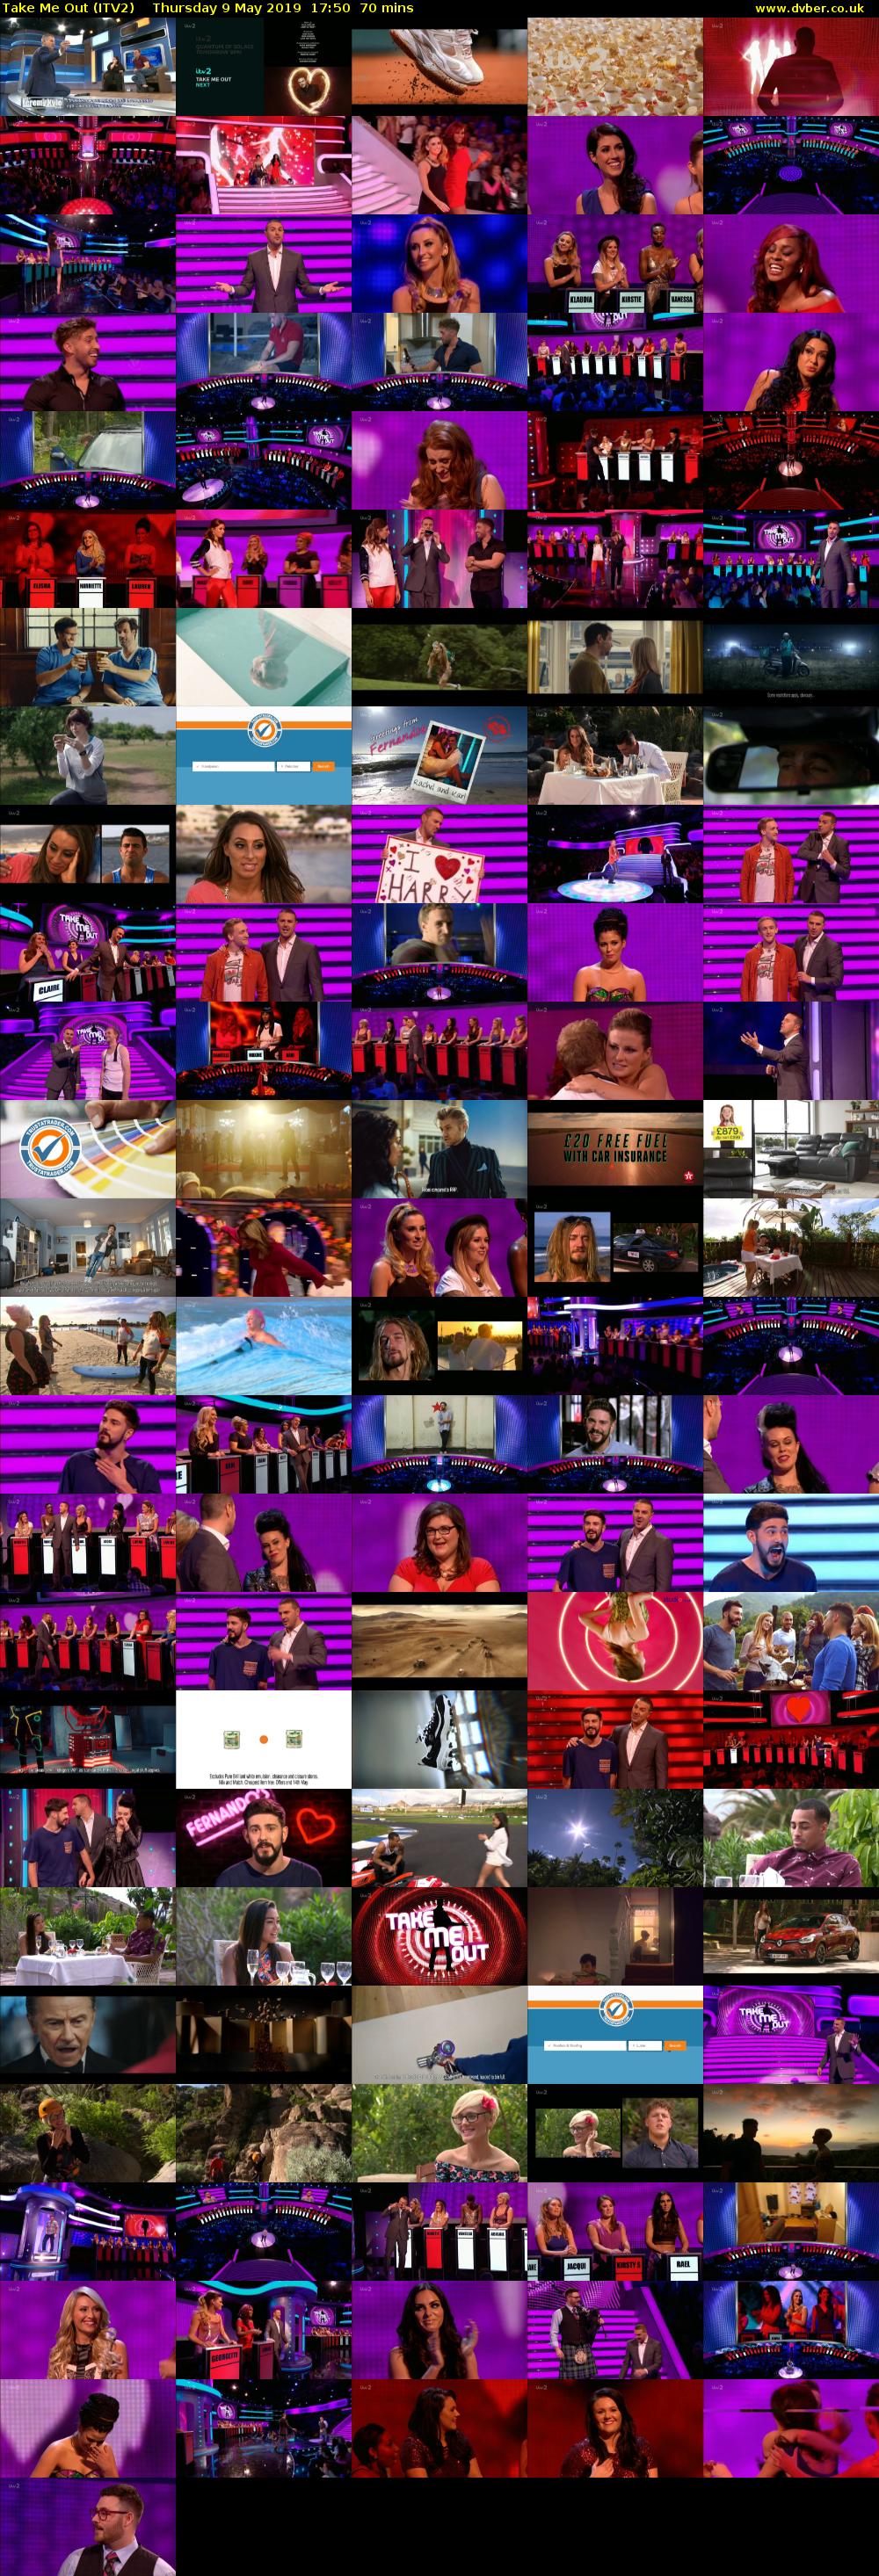 Take Me Out (ITV2) Thursday 9 May 2019 17:50 - 19:00